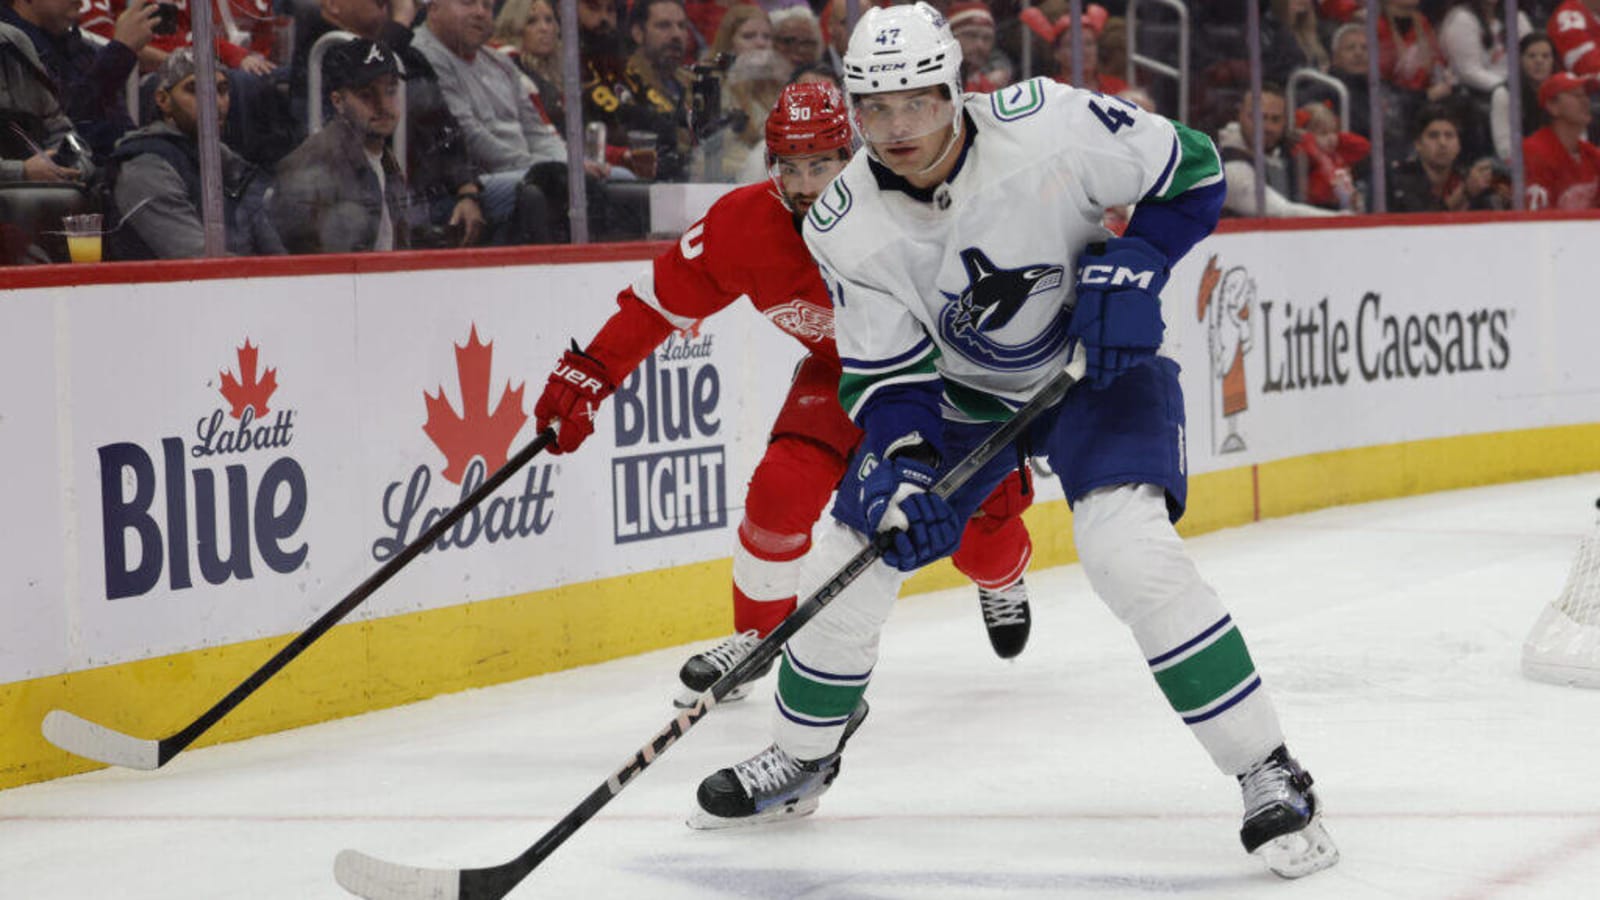 A Look at Noah Juulsen’s Improvement with the Canucks